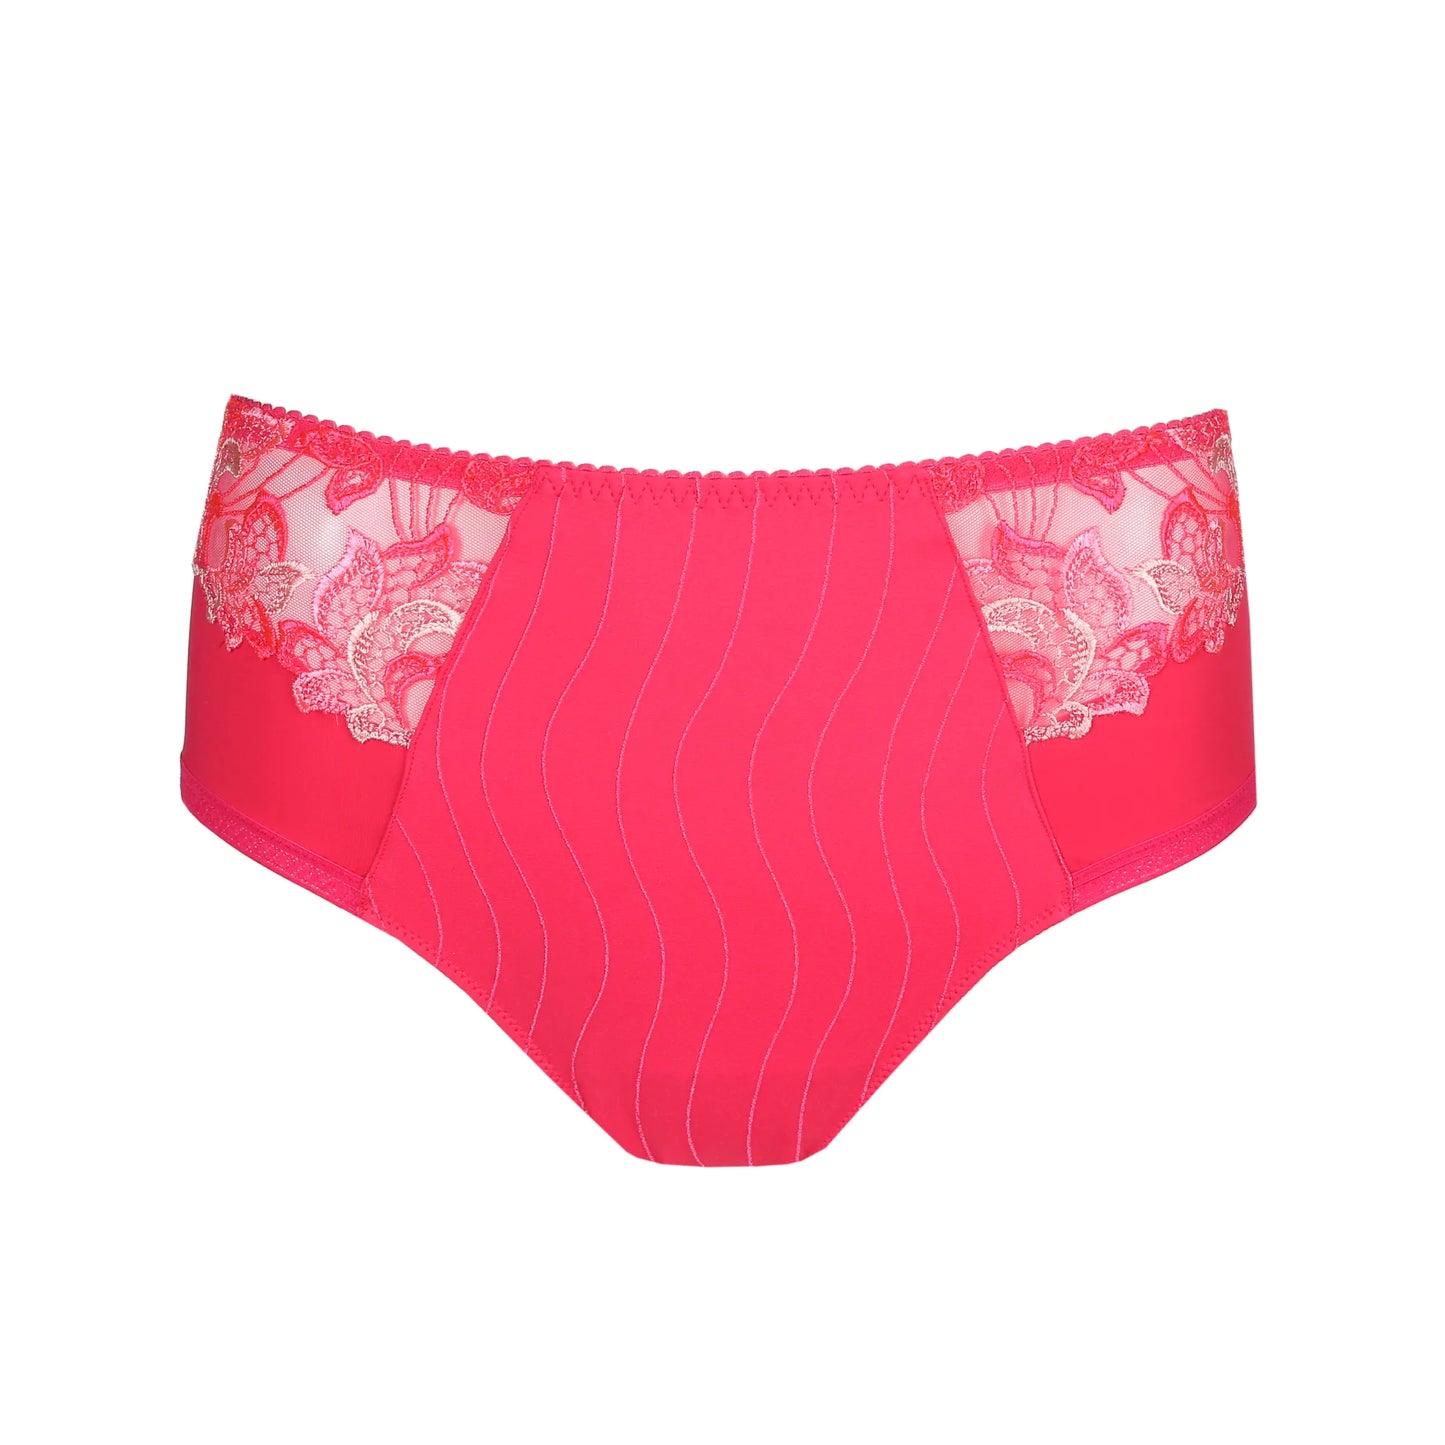 Deauville Full Brief - Amour - Limited Edition